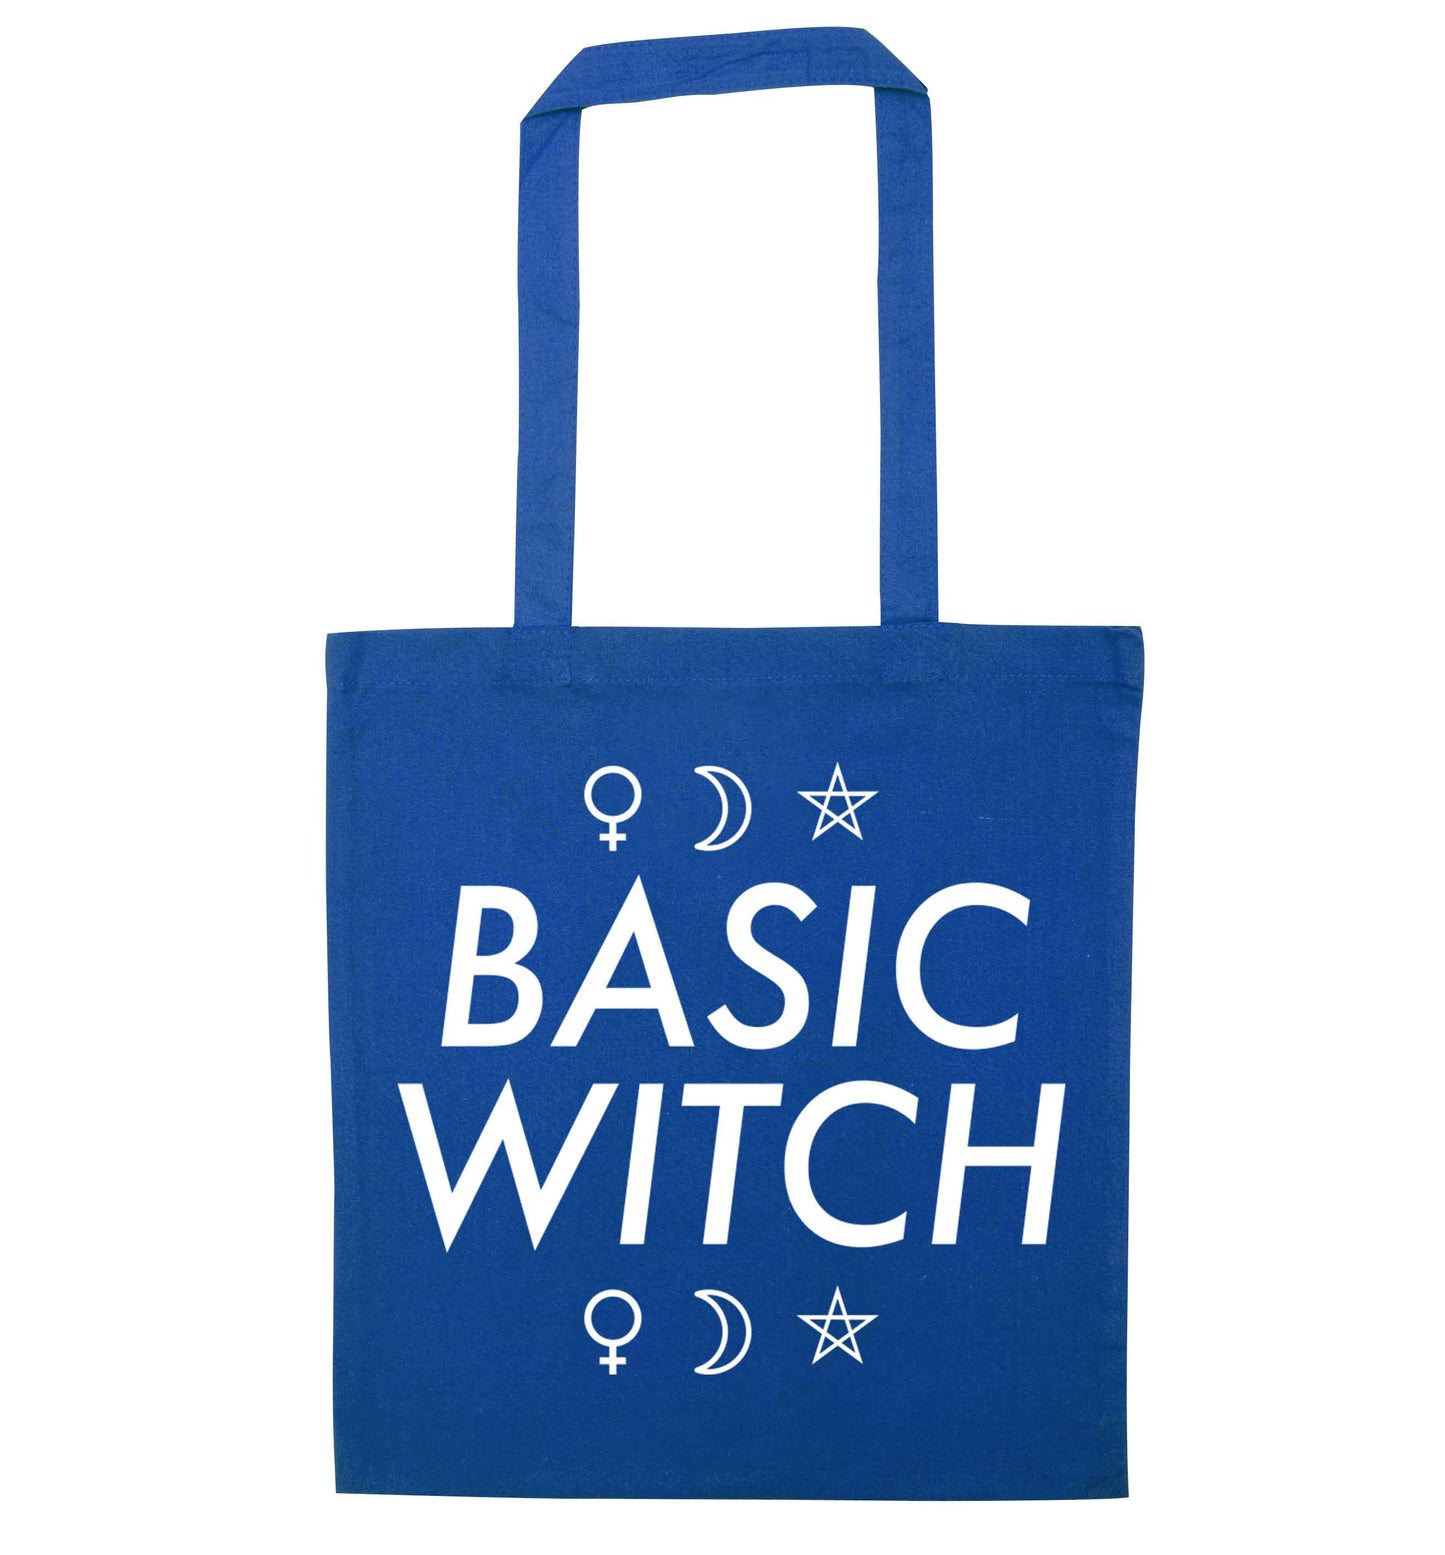 Basic witch 1 blue tote bag